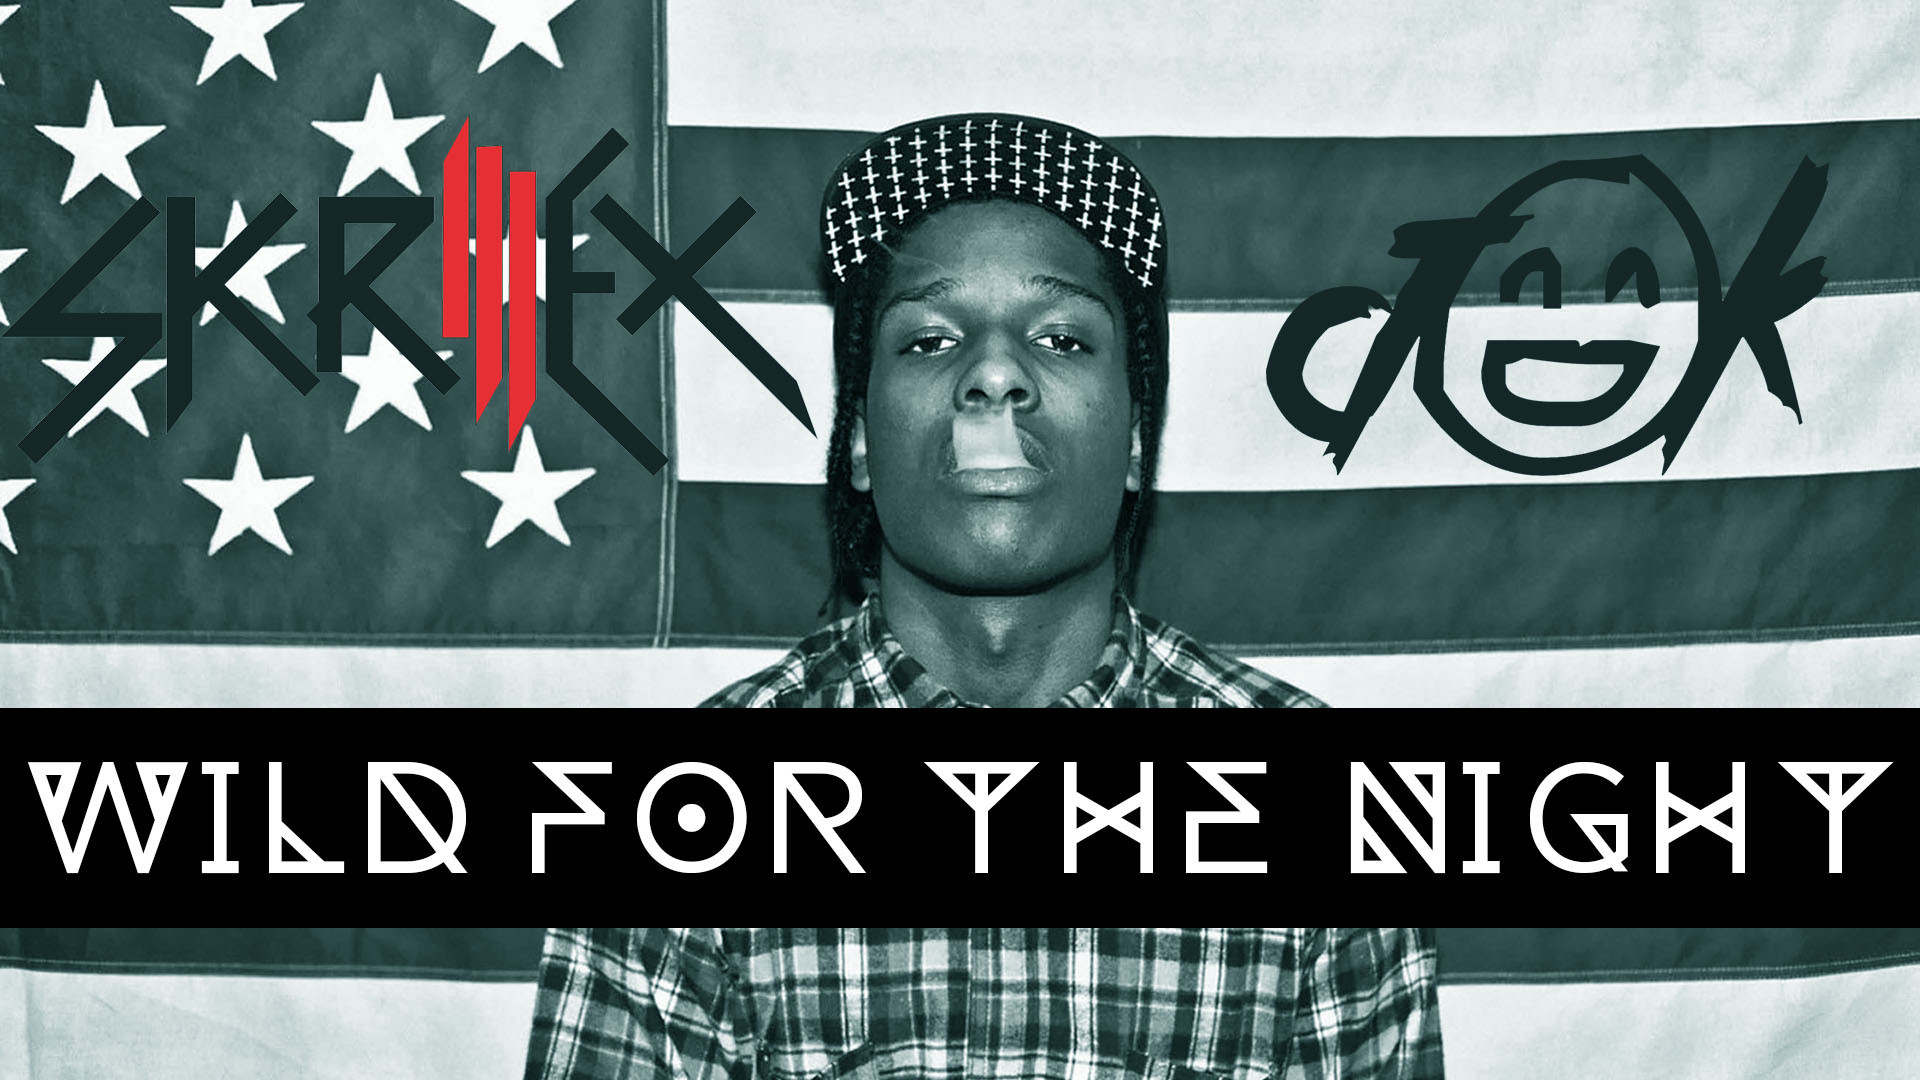 ASAP ROCKY WALLPAPERS FREE Wallpapers & Background images .